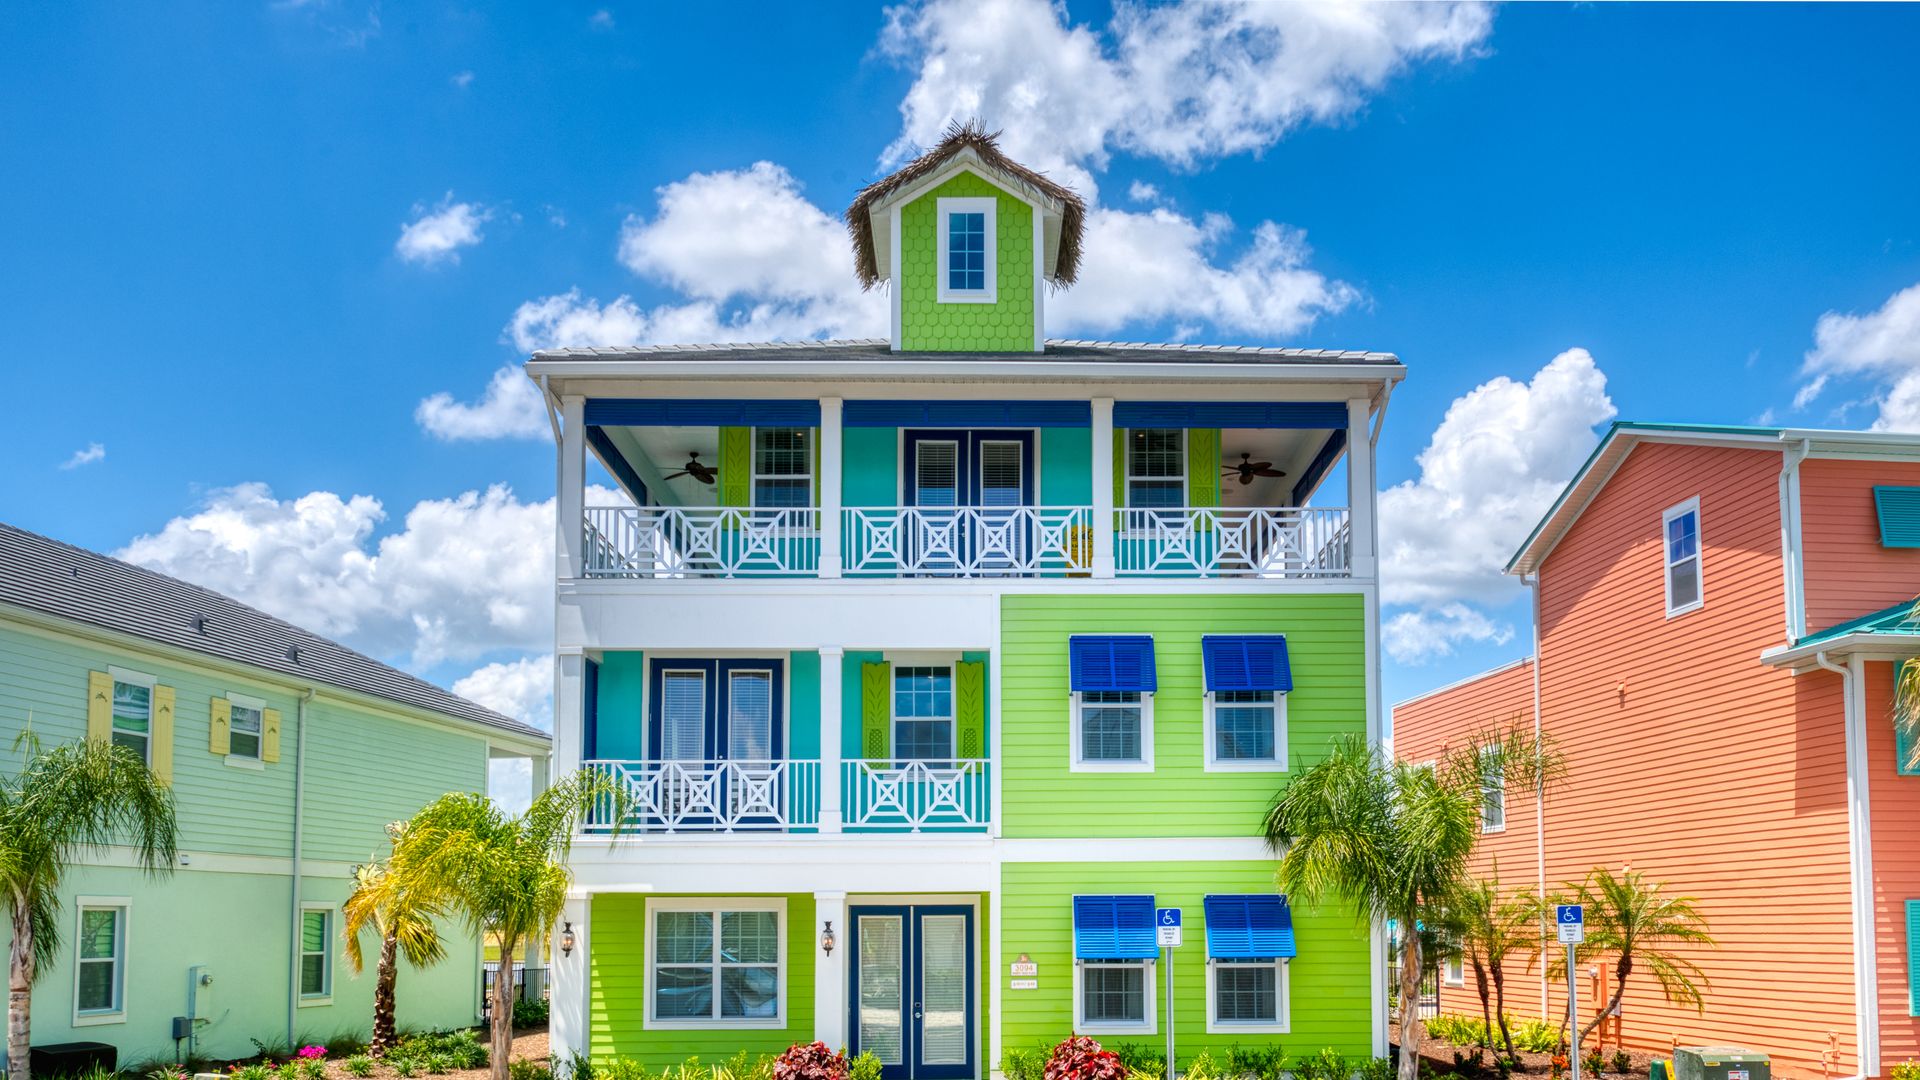 A bright, lime green, 3-story building with white balconies and blue shutters and palm trees in front. 